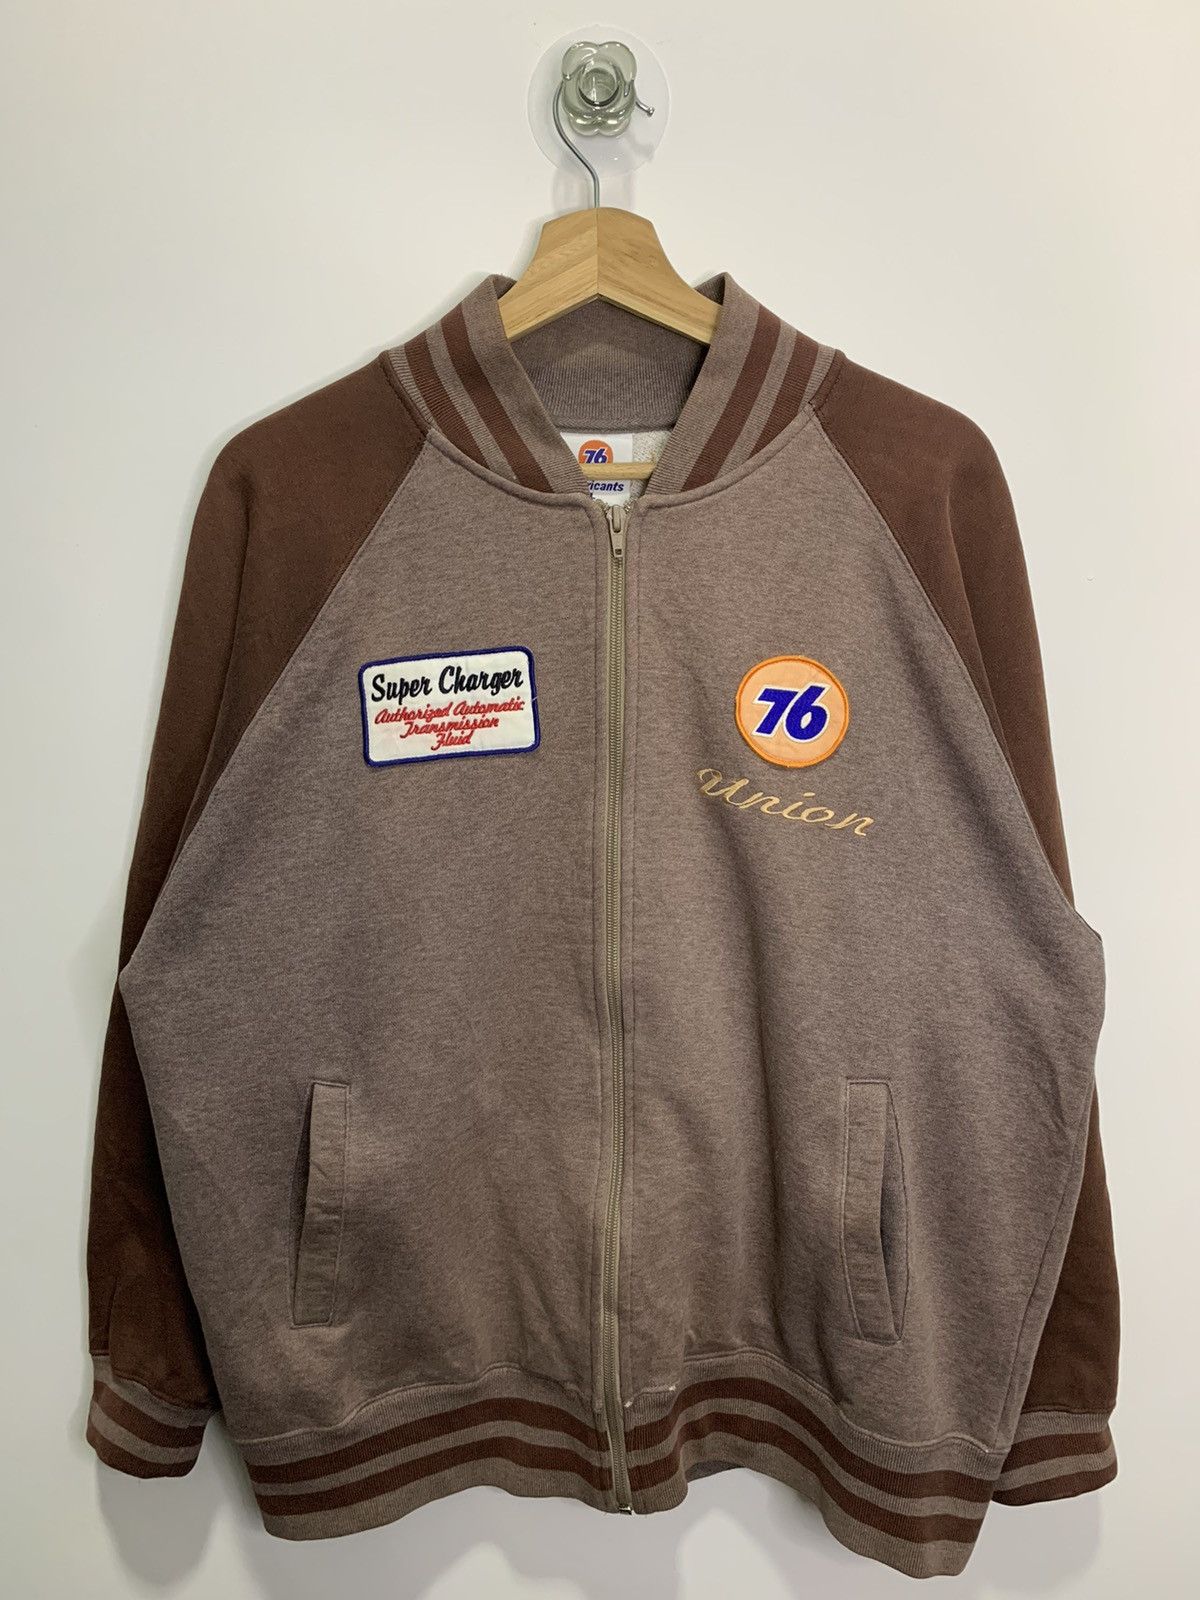 76 Lubricant Jacket | Grailed